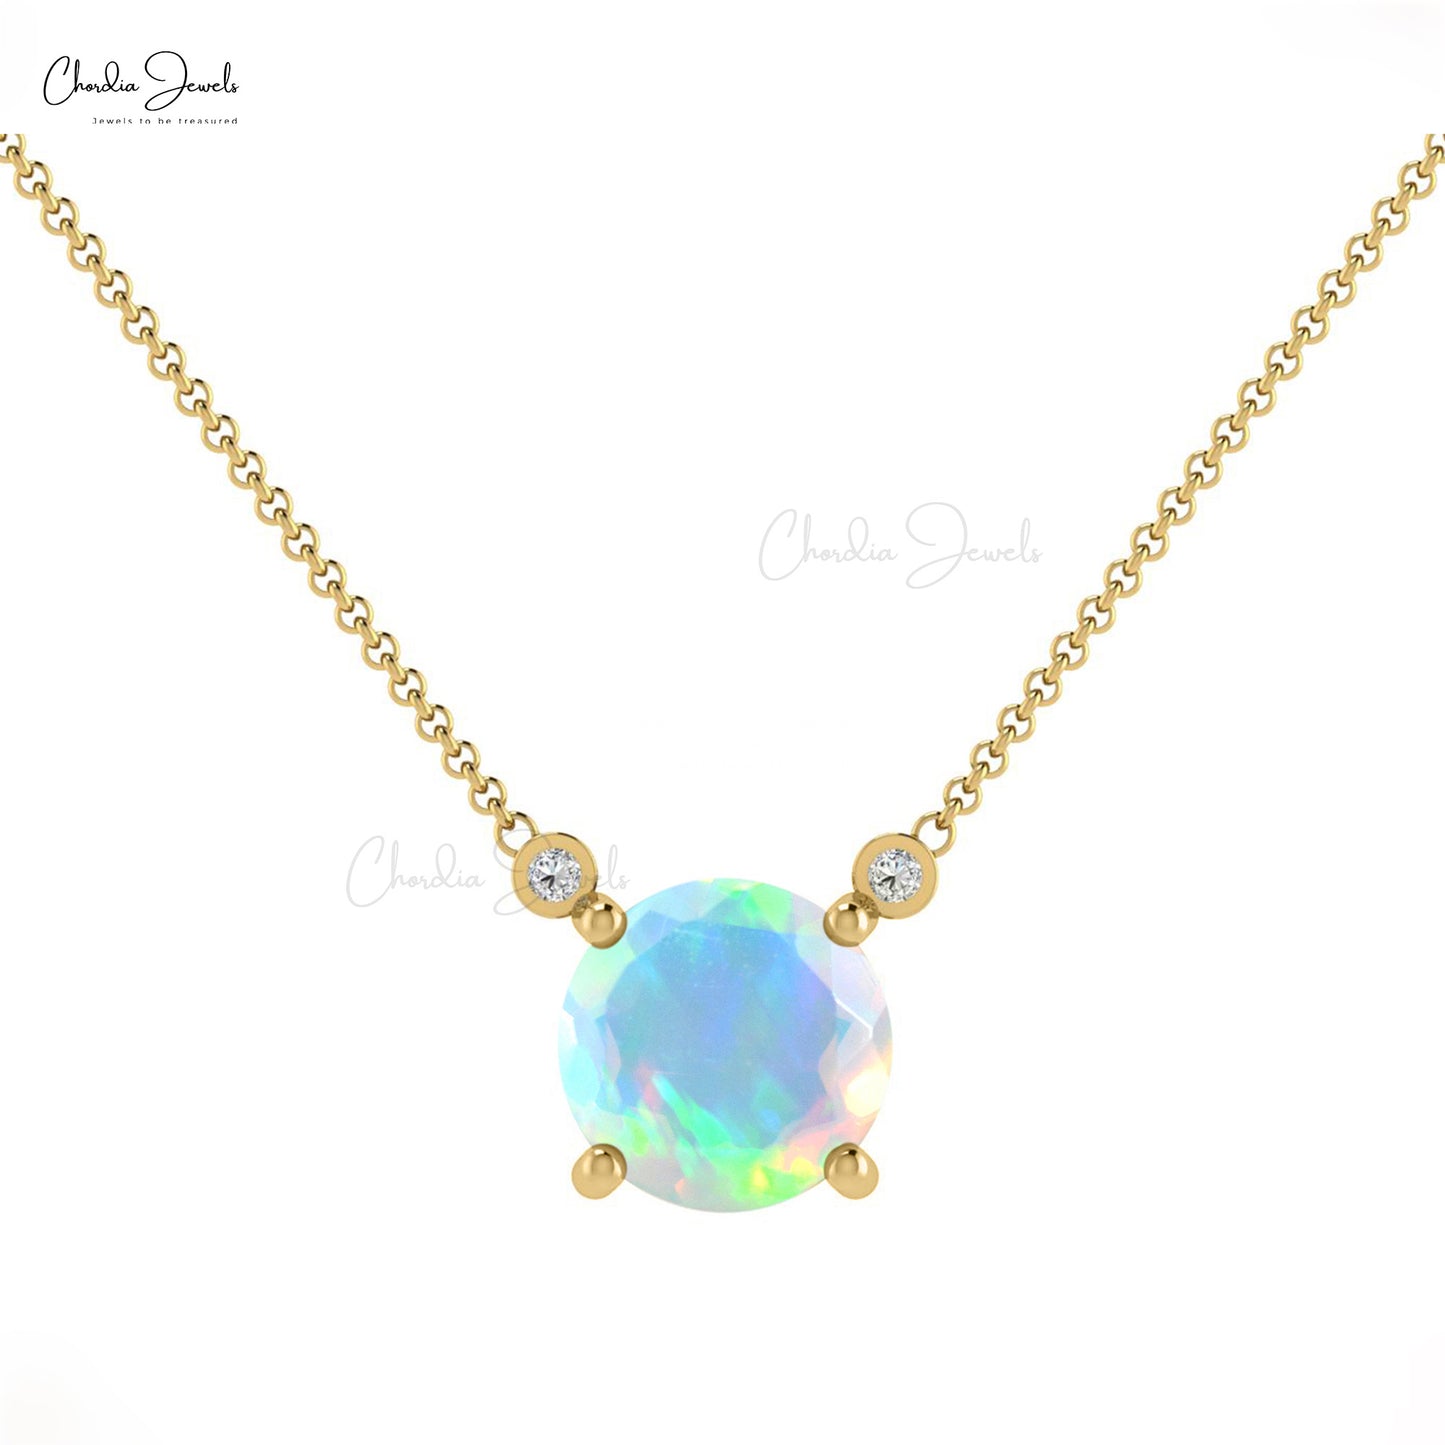 Natural Ethiopian Opal and Diamond Necklace, 14k Solid Gold 6mm Round Gemstone Handmade Necklace, Wedding Anniversary Necklace Gift for Her